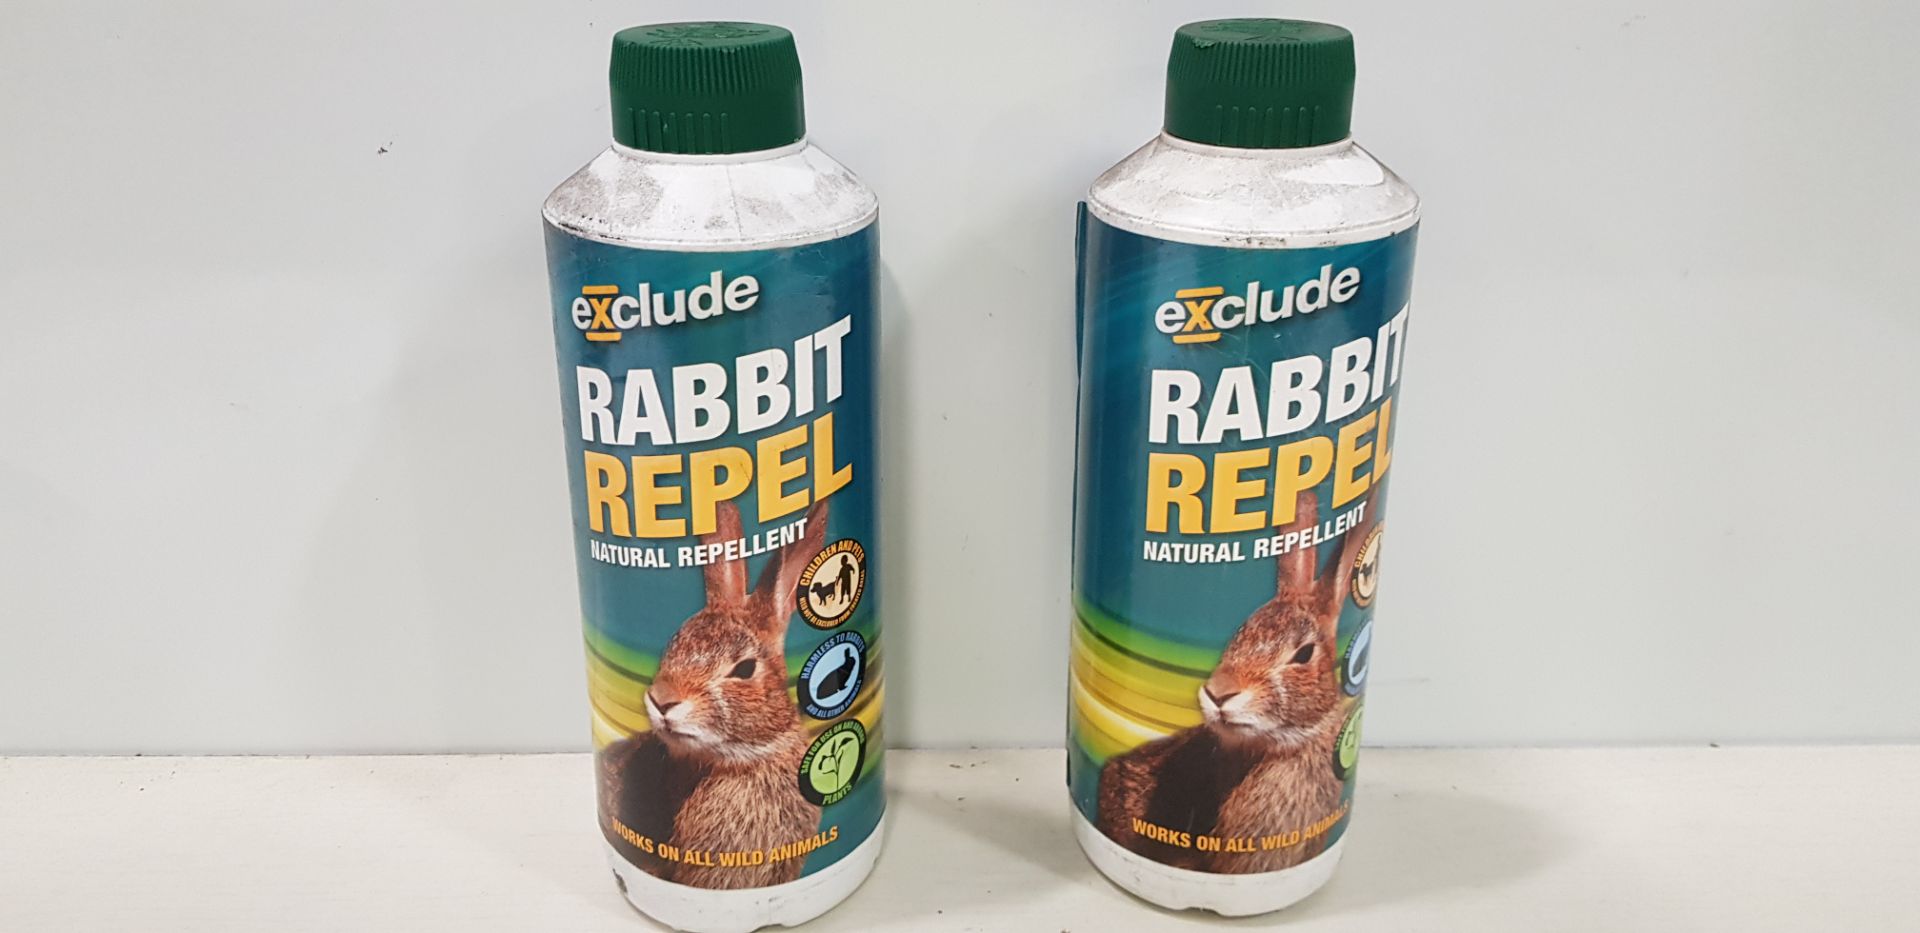 96 X BRAND NEW EXCLUDE RABBIT REPEL NATURAL REPELLENT ( WORKS ON ALL WILD ANIMALS (ECO FRIENDLY)